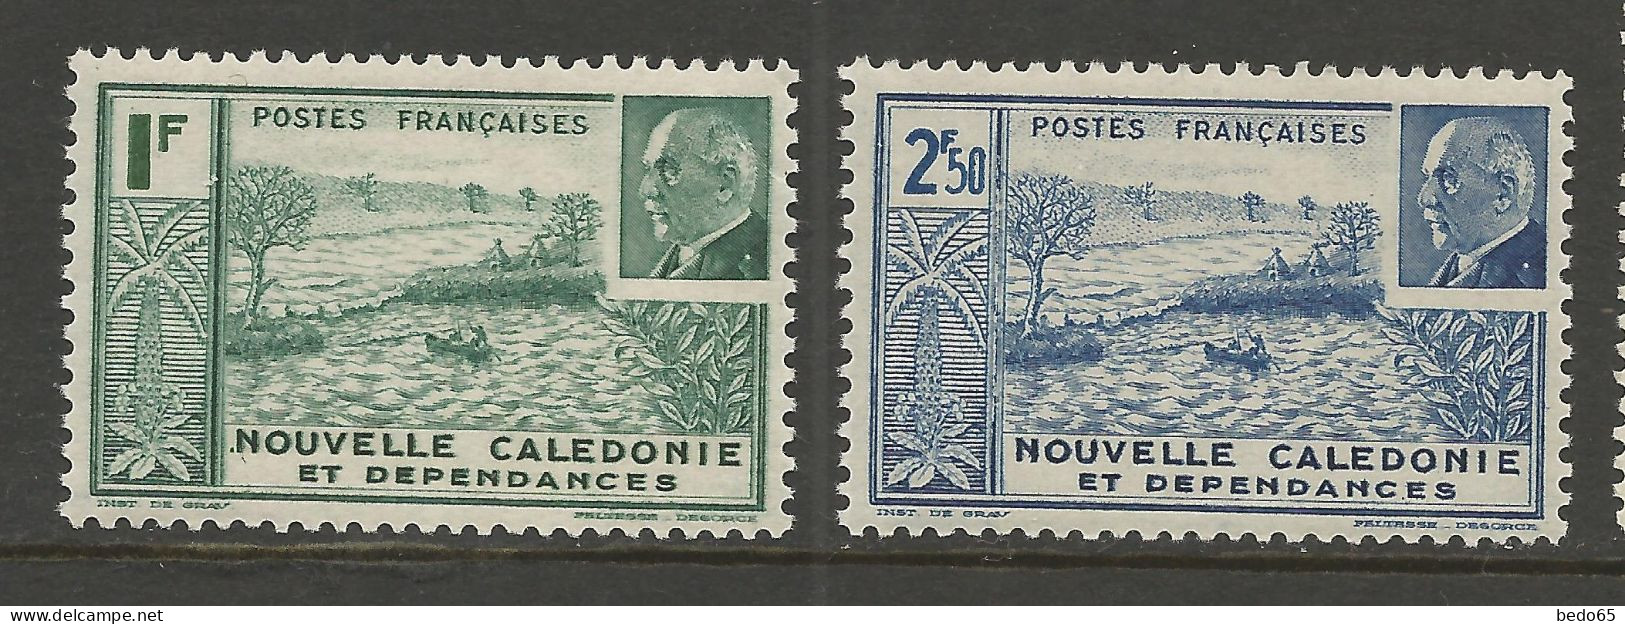 NOUVELLE-CALEDONIE   N° 193 Et 194  NEUF** SANS CHARNIERE / Hingeless / MNH - Nuovi